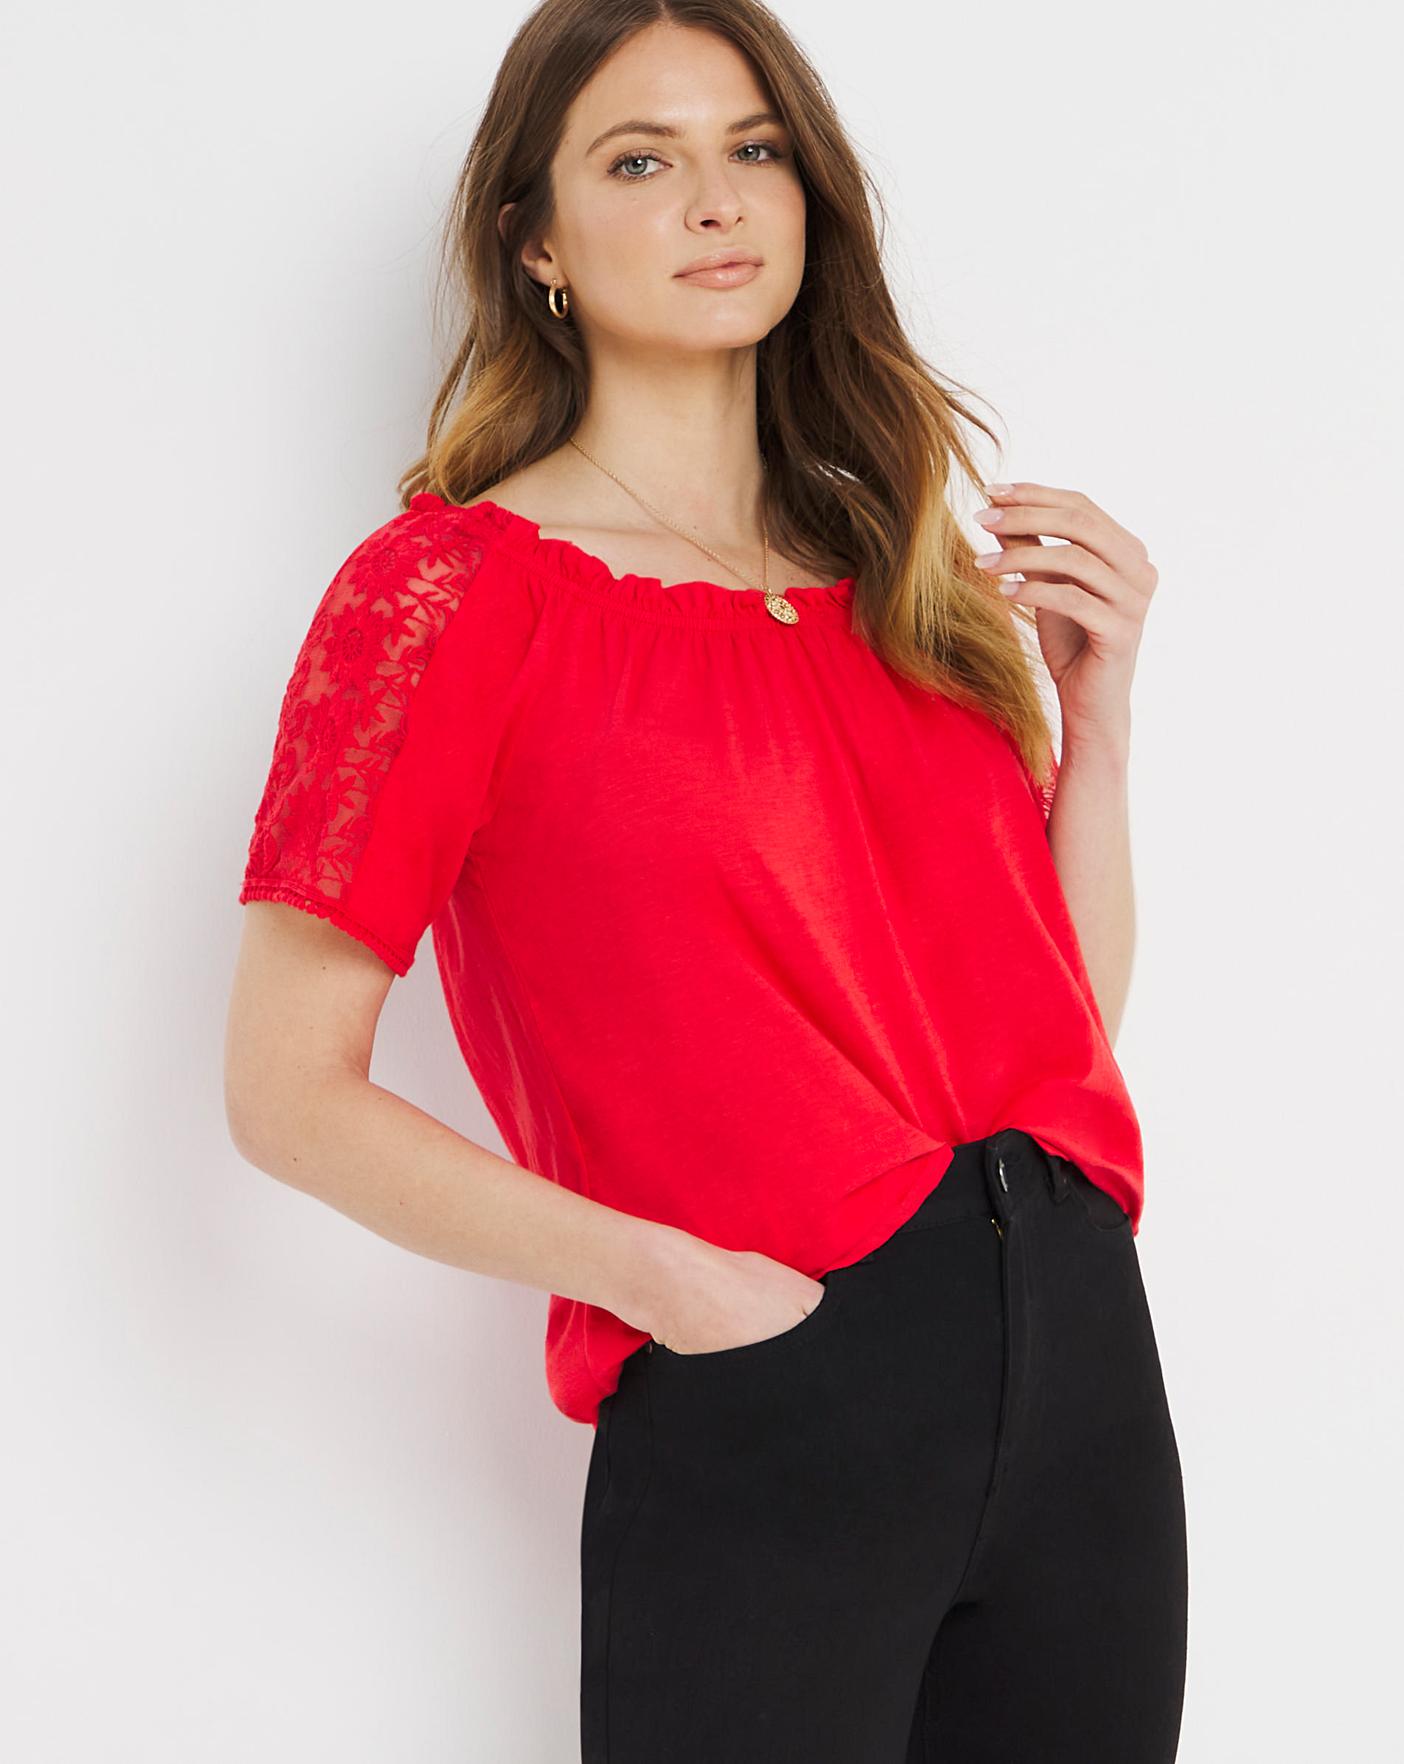 Julipa Gypsy Top with Lace Sleeve Insert | J D Williams